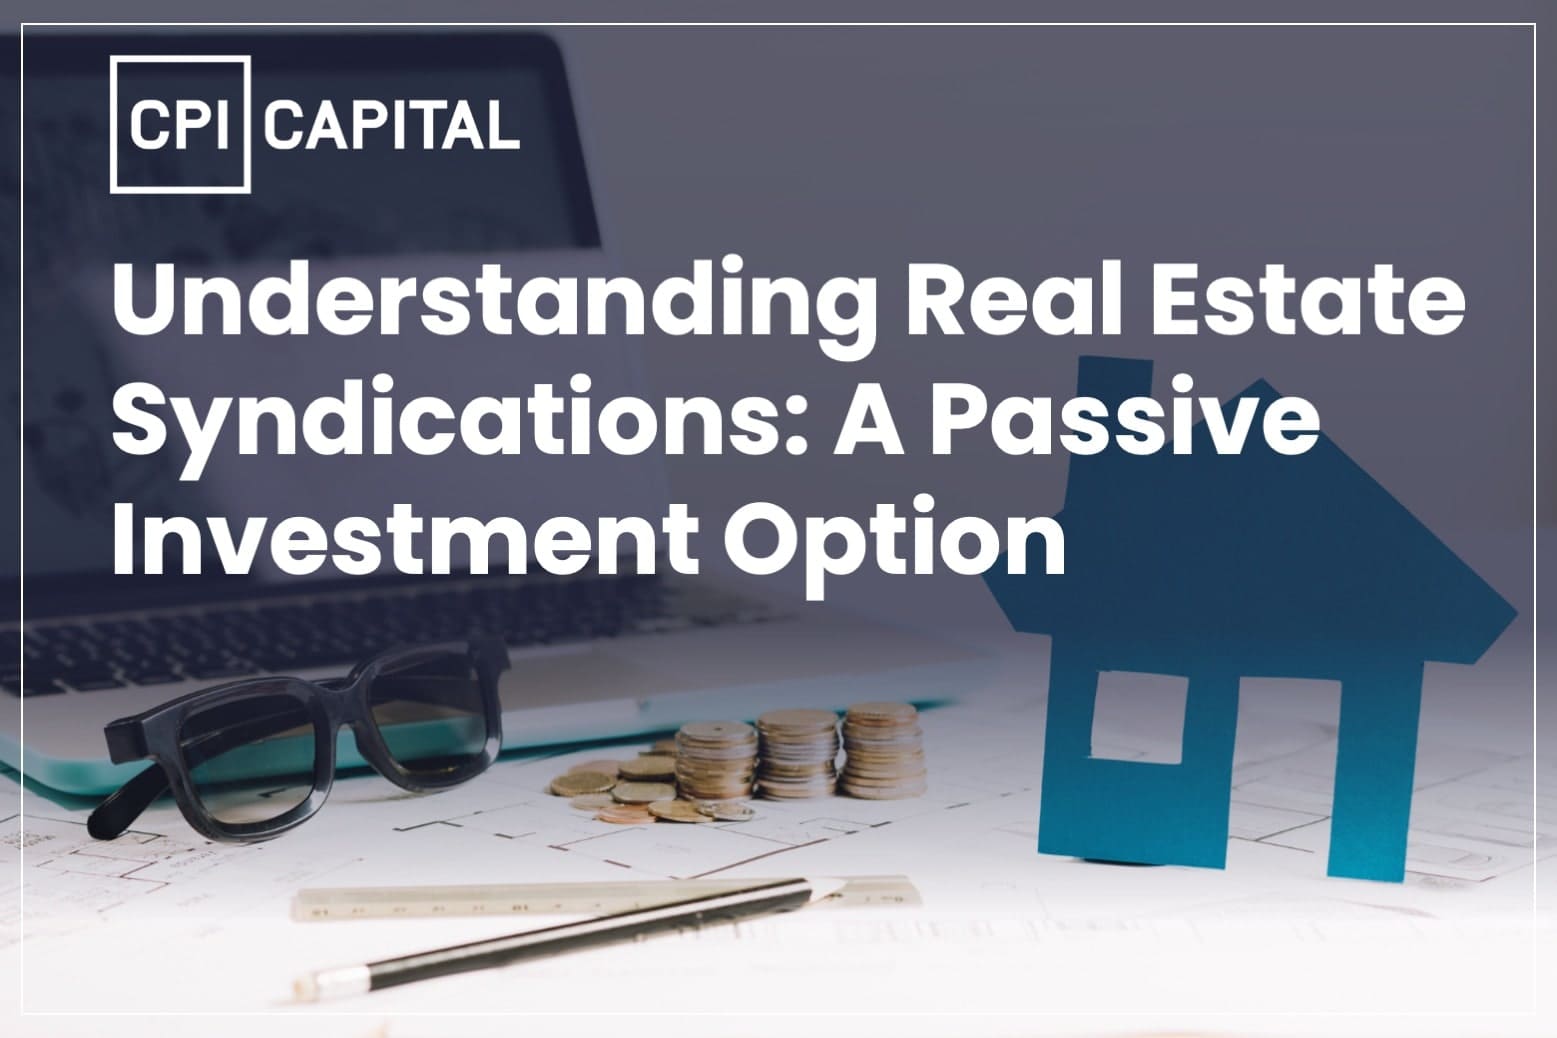 CPI capital_Understanding Real Estate Syndications-A Passive Investment Option